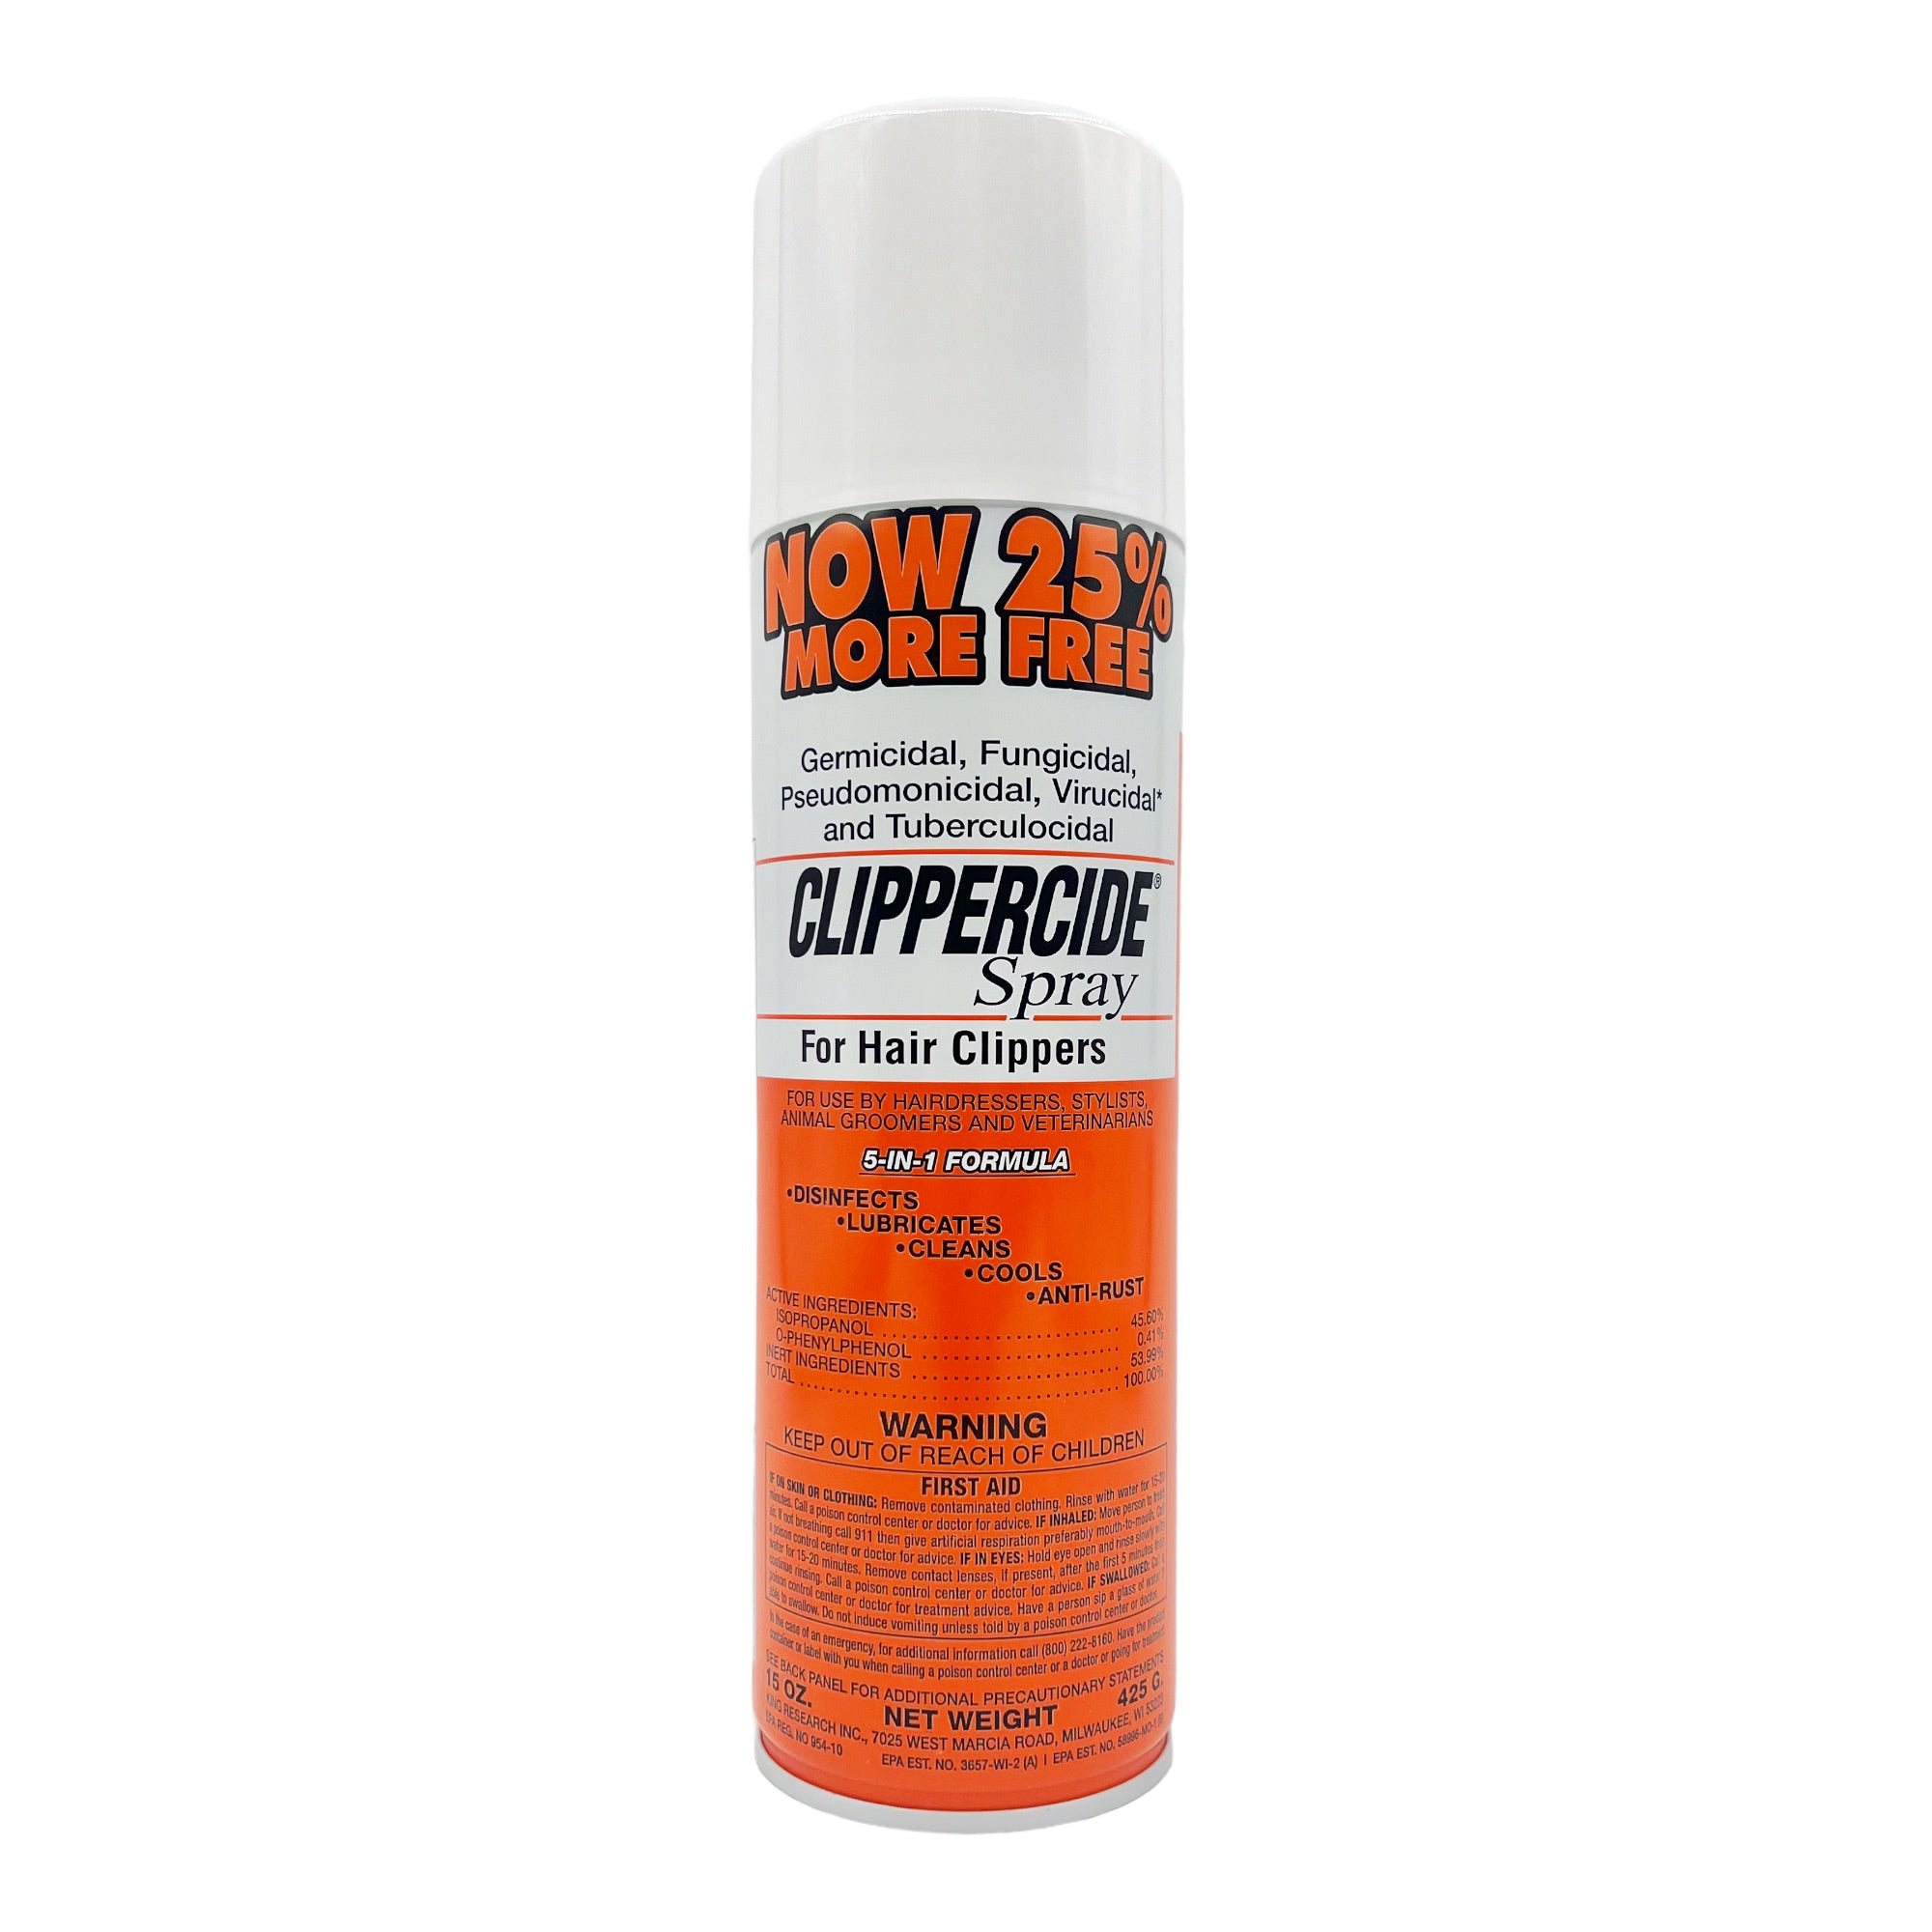 Clippercide - Spray for Hair Clippers 5-in-1 Formula 425g